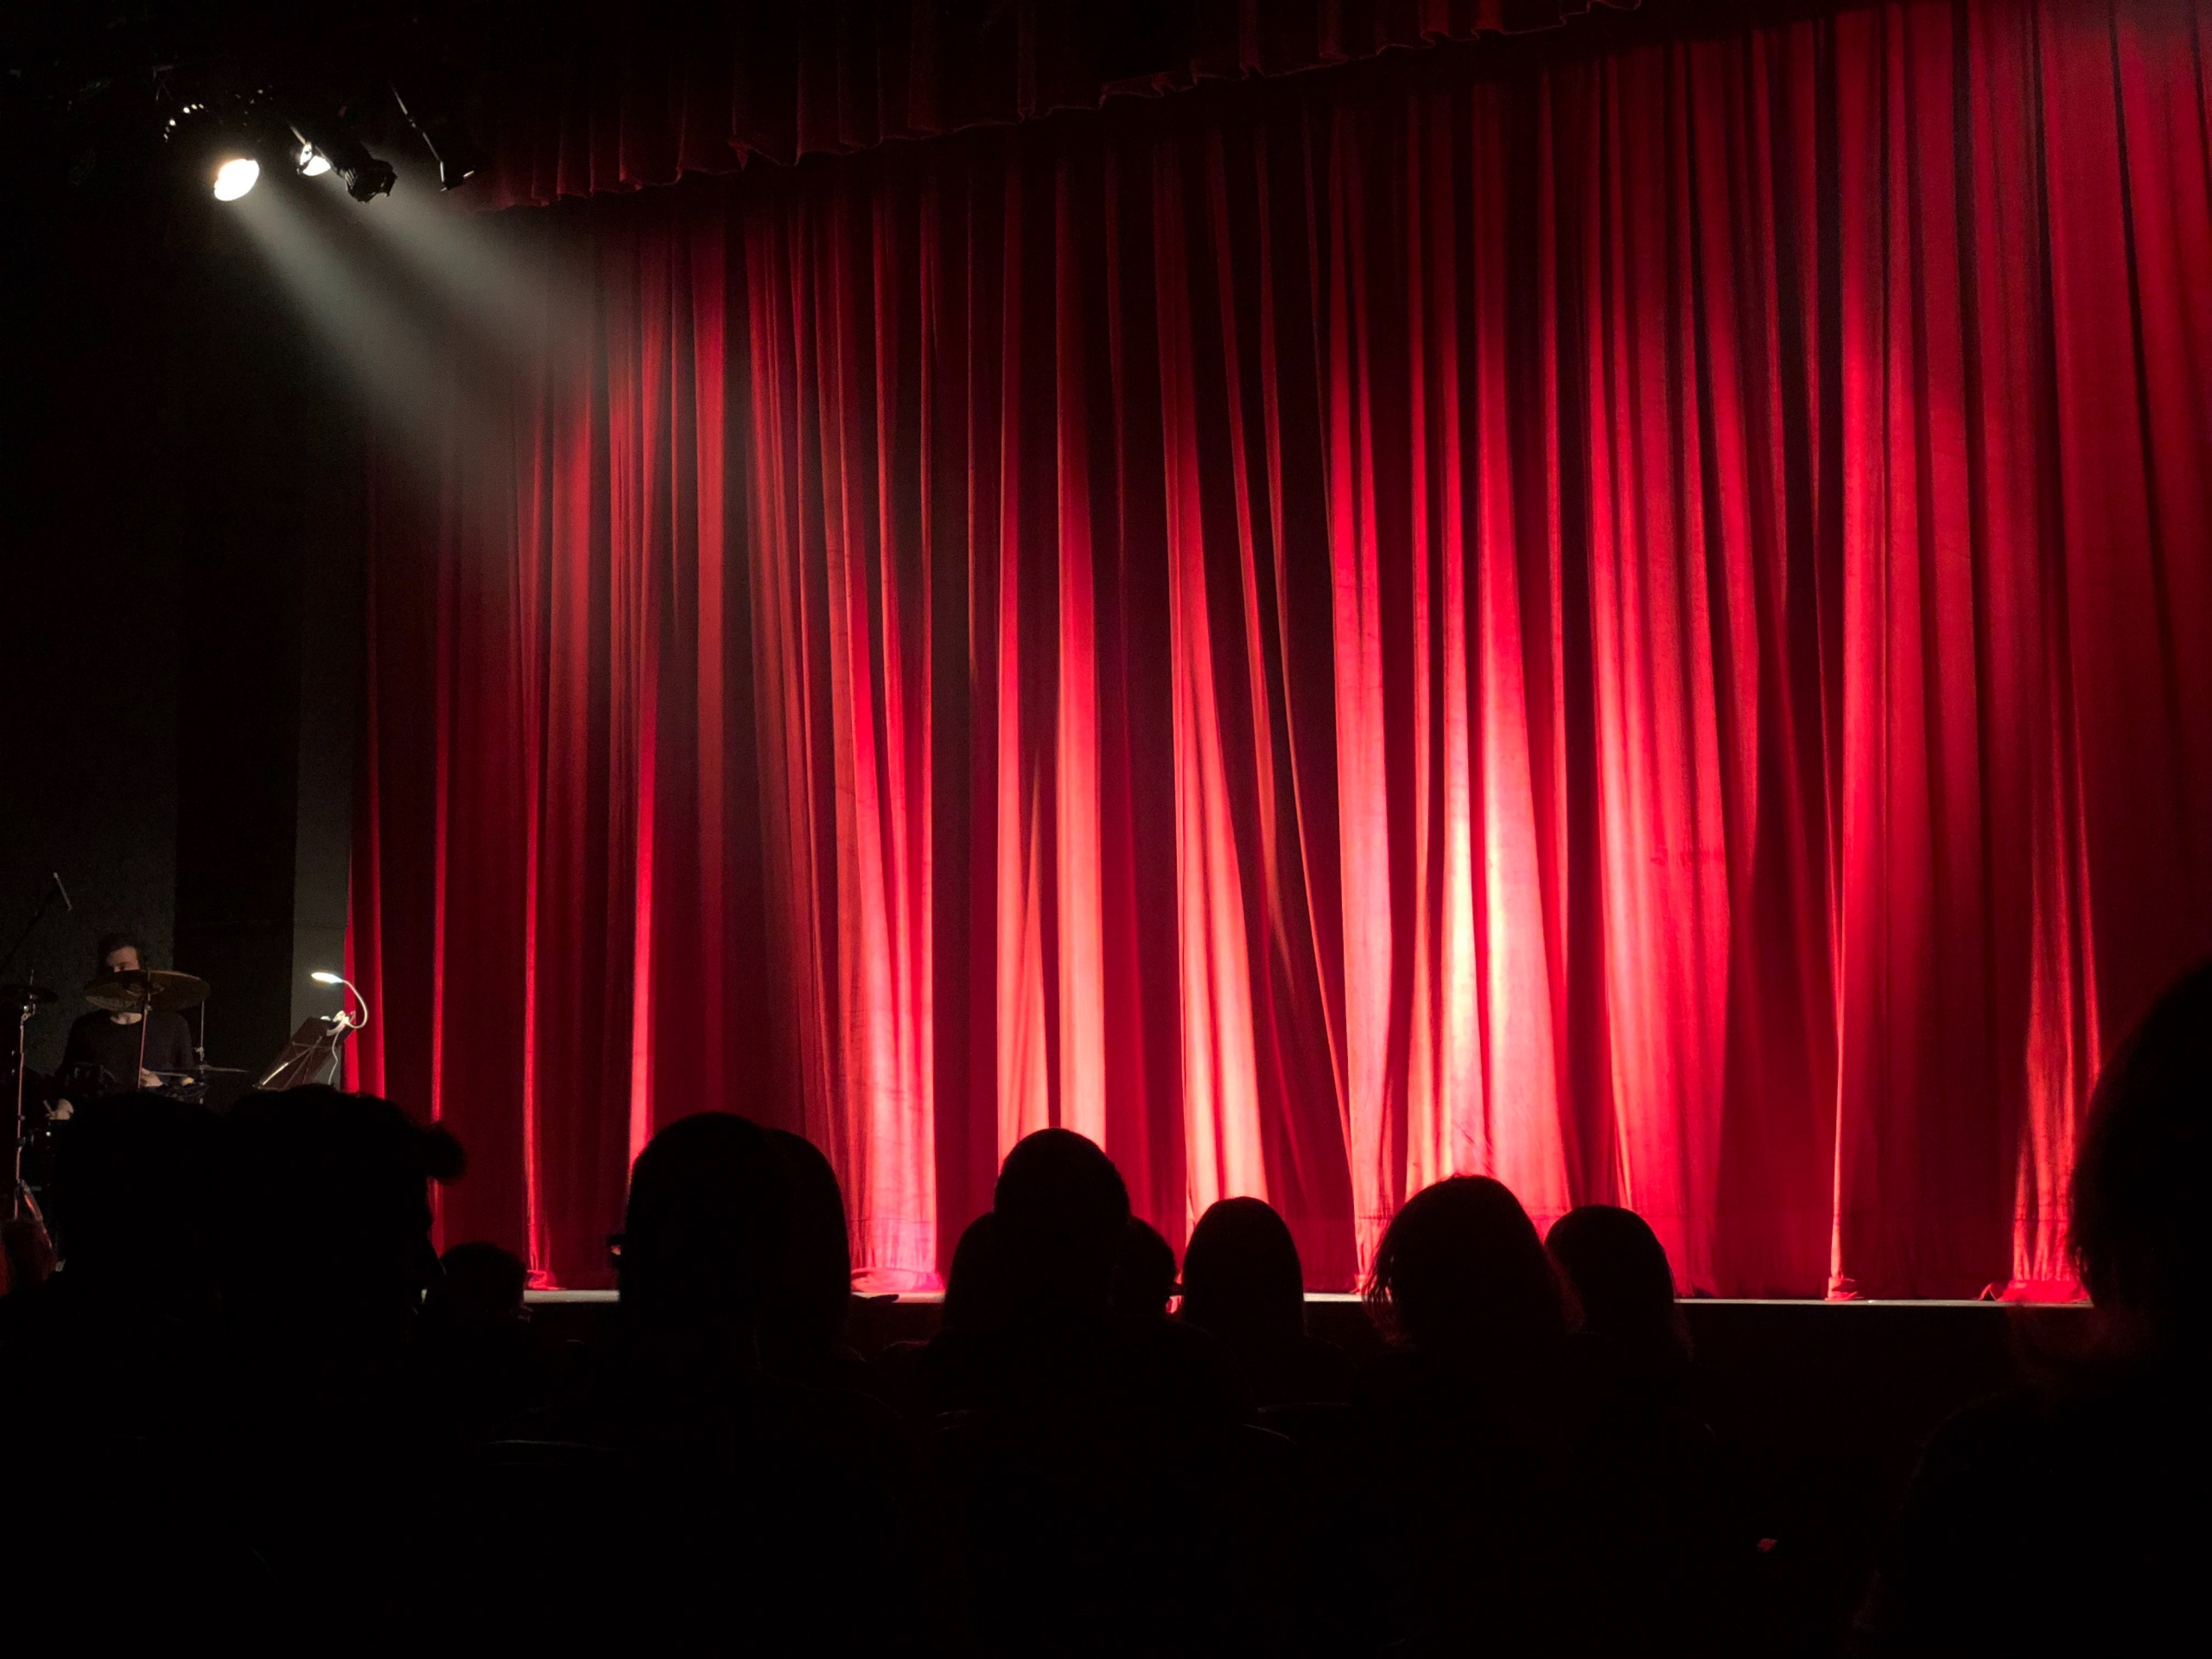 red curtains closed on a stage in a theatre with a spotlight on the stage from the left and the silhouettes of audience members for collective encounters